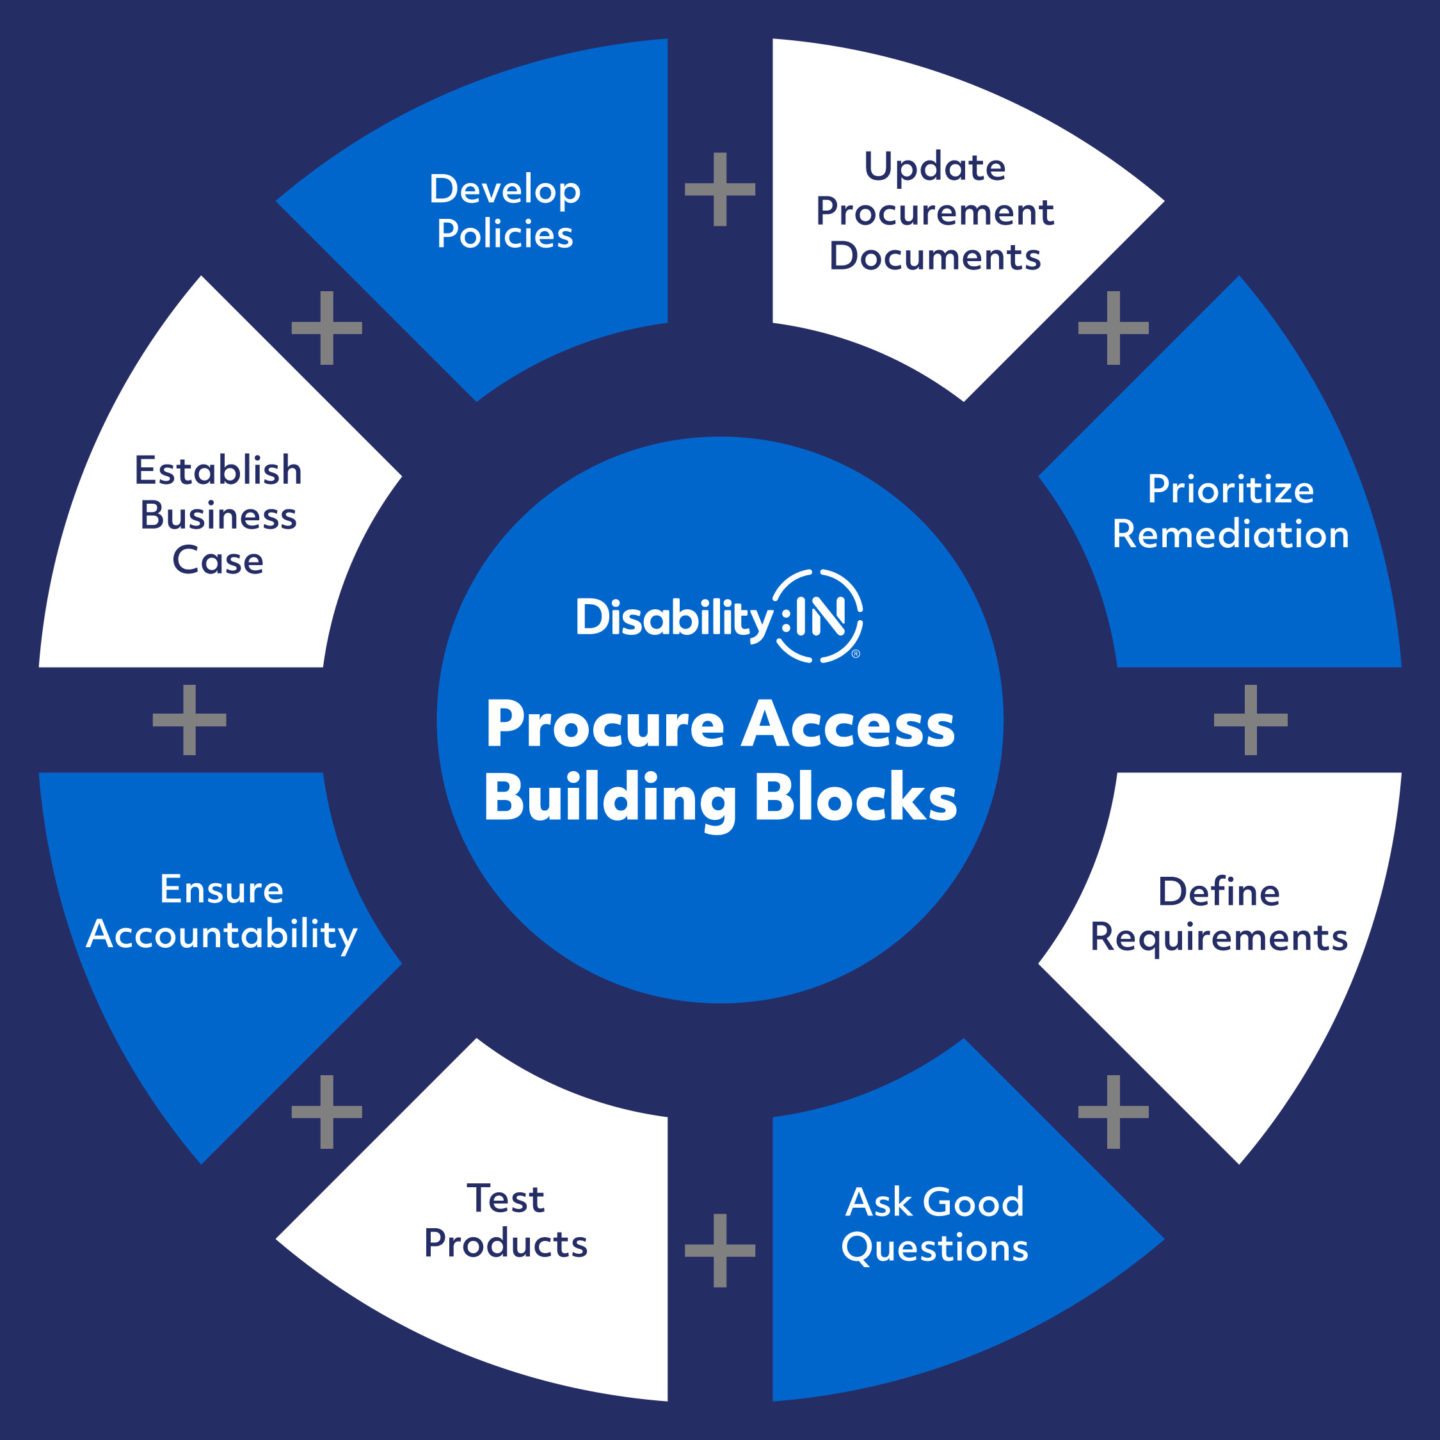 Circle diagram of eight Procure Access Building Blocks: Establish Business Case, Develop Policies, Update Procurement Documents, Prioritize Remediation, Define Requirements, Ask Good Questions, Test Products, and Ensure Accountability.